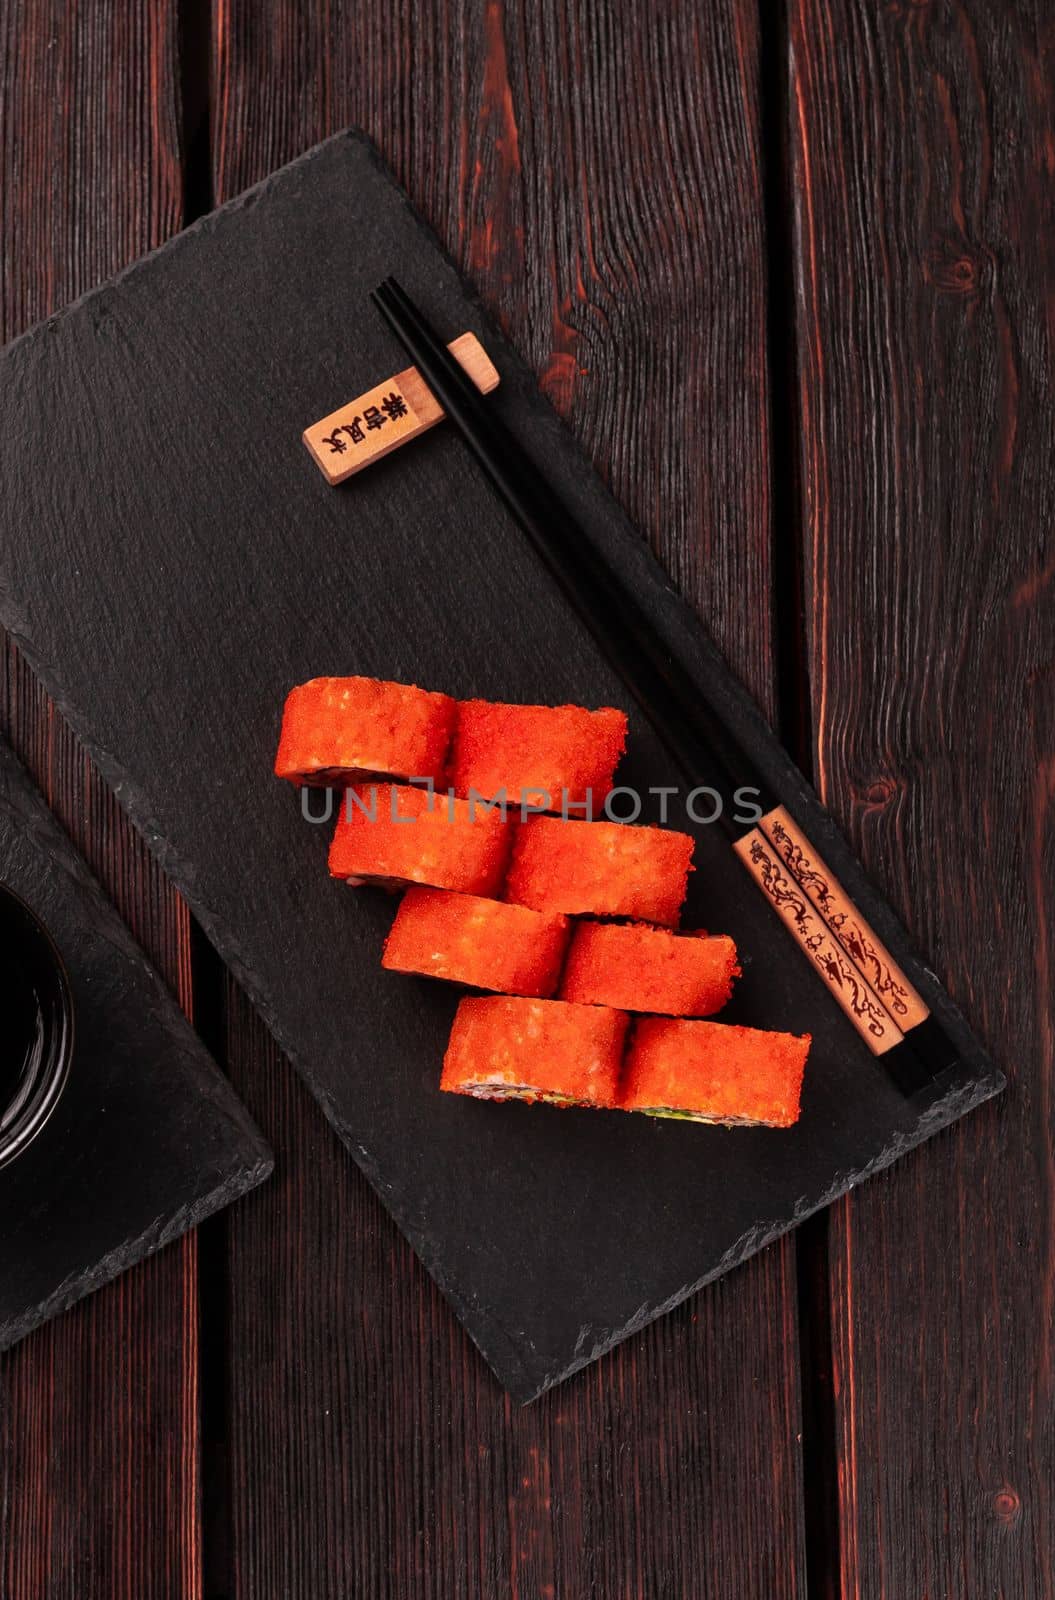 Roll with fish sushi with chopsticks top view - asian food concept by Satura86